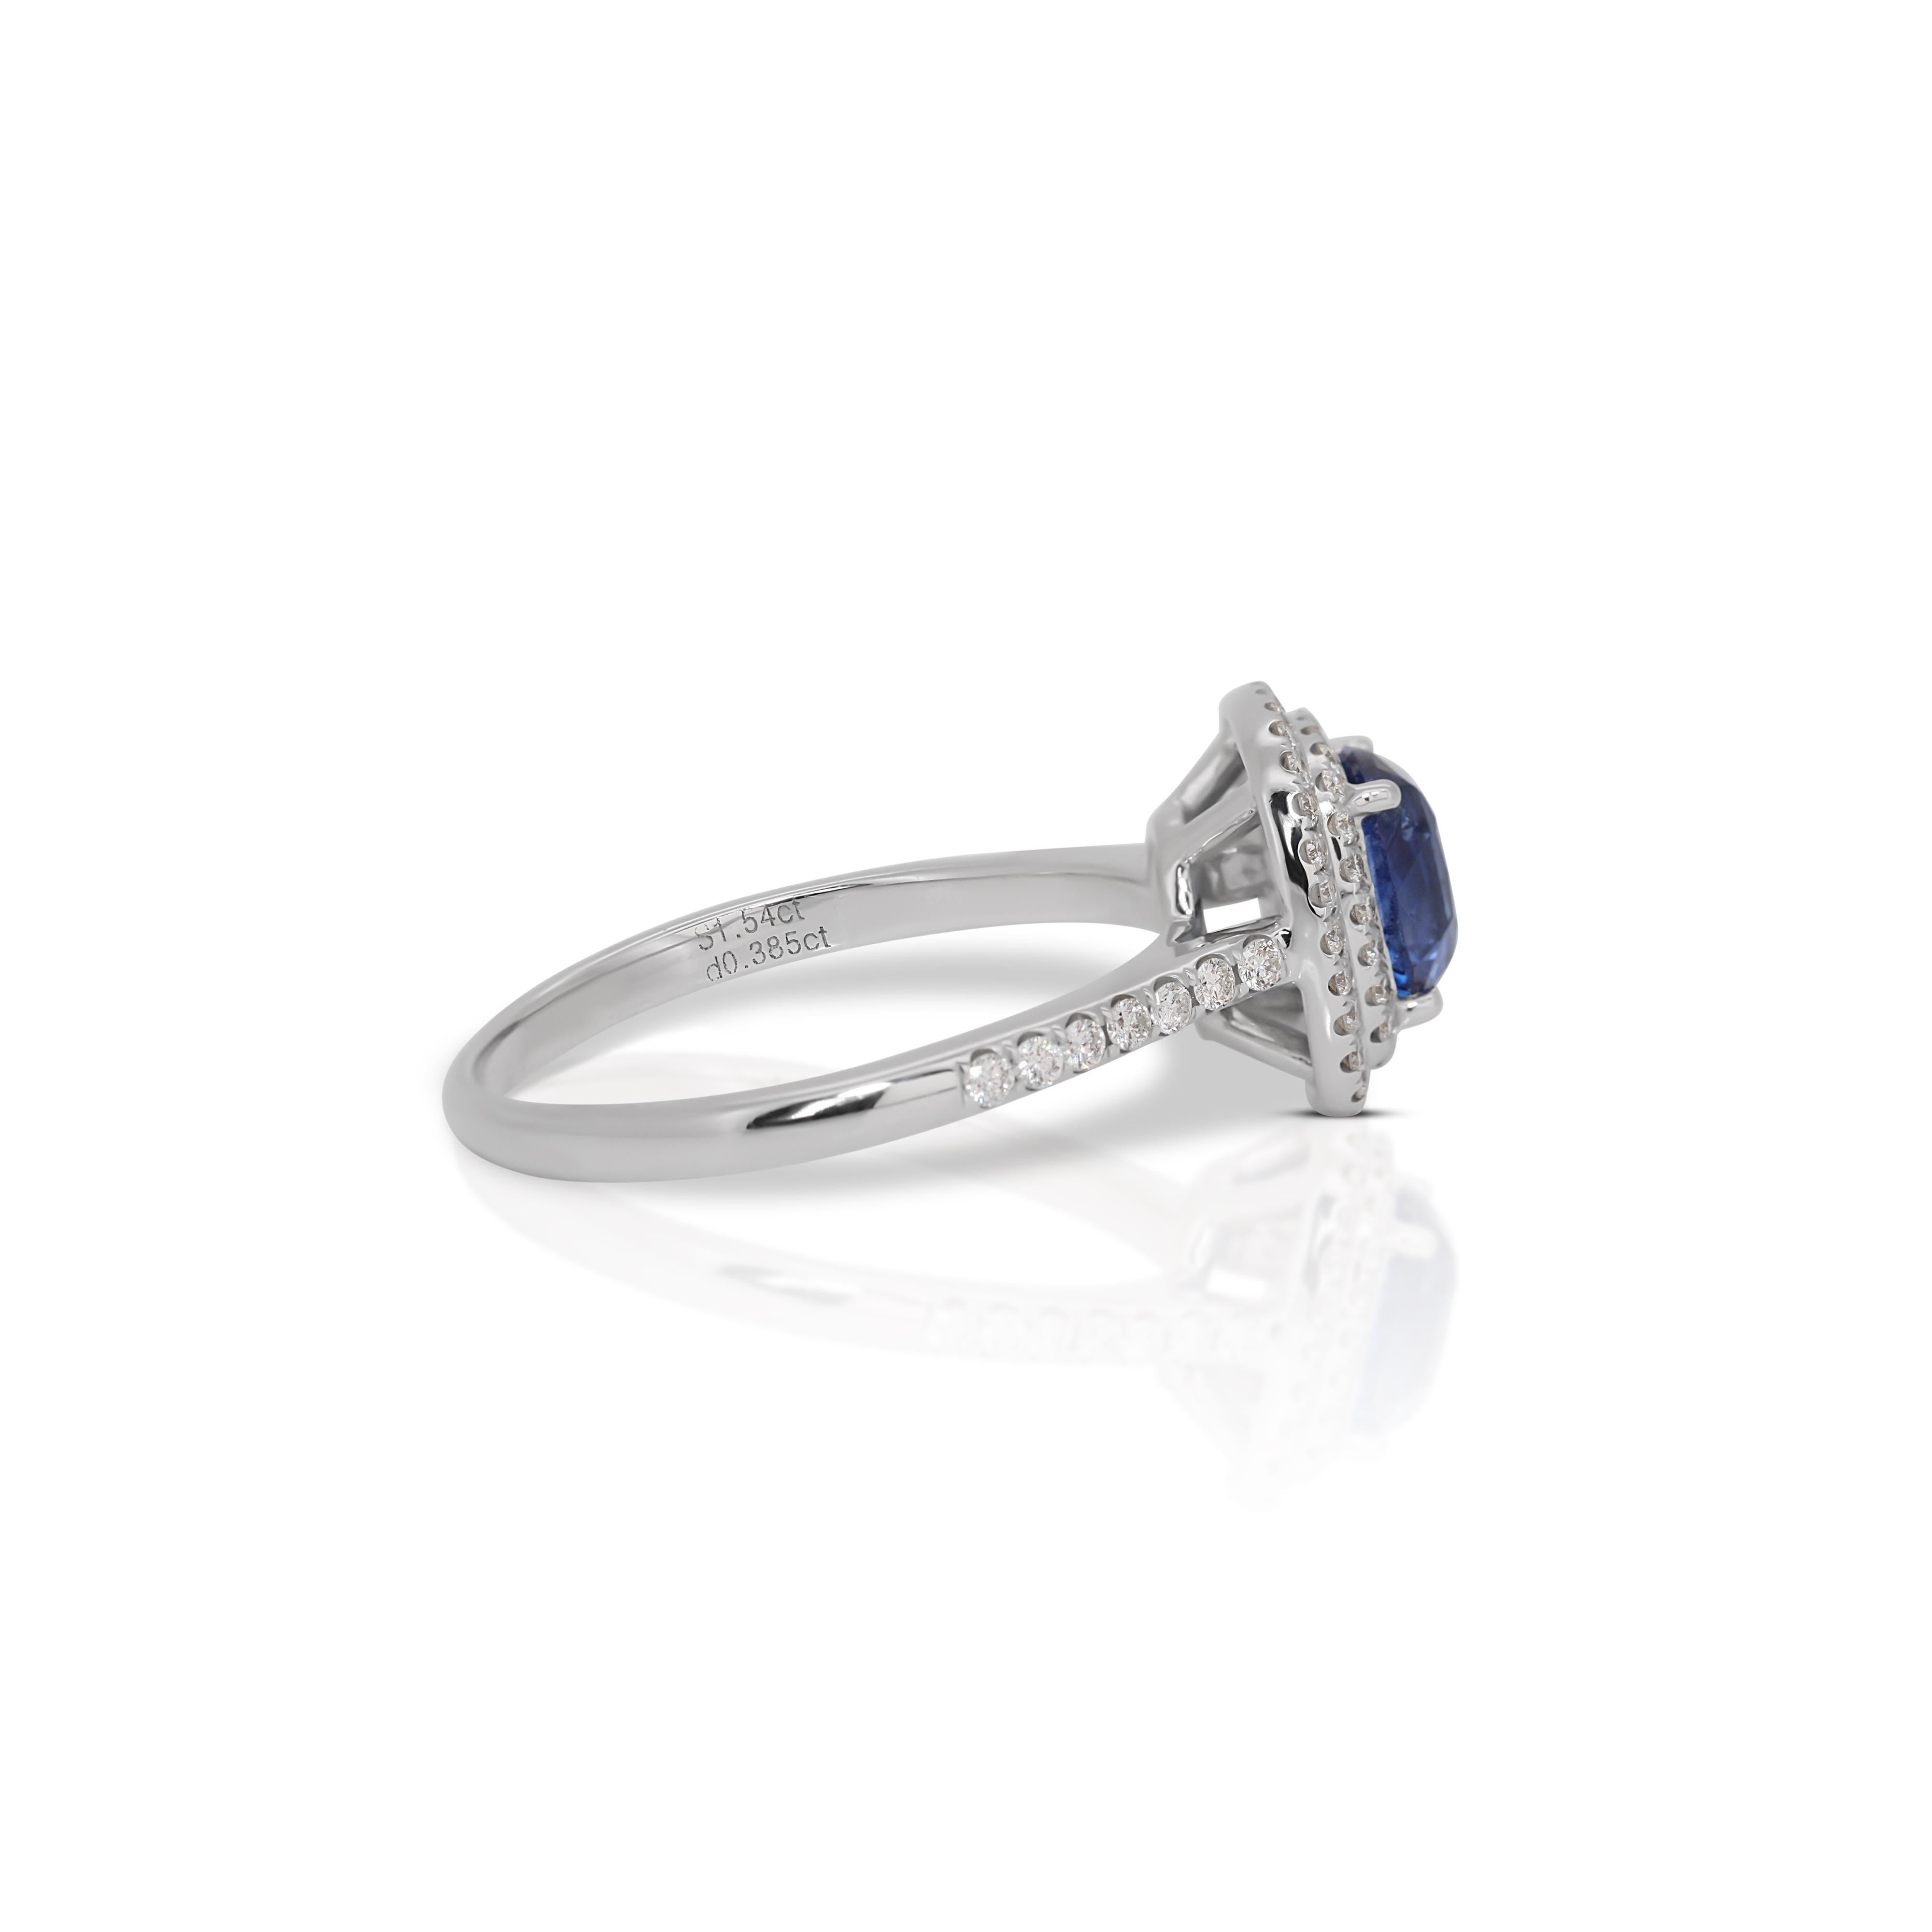 Majestic 18k White Gold Cushion Sapphire and Diamond Halo Ring w/2.21 ct - IGI Certified

Embrace the serene elegance of this 18k White Gold Halo Ring that captivates with its deep blue allure and radiant diamond halo. Central to its design is a